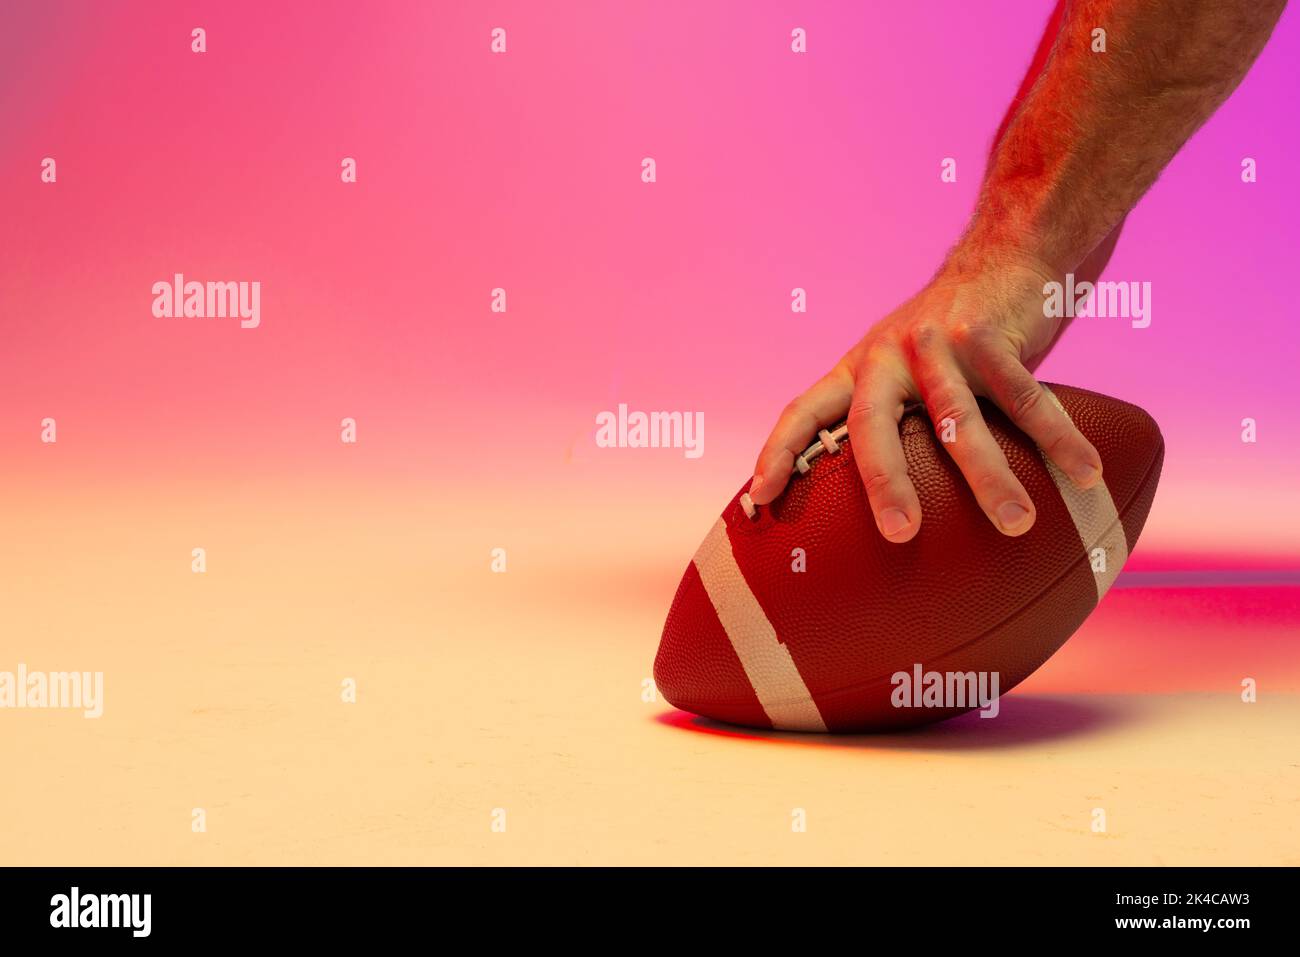 Hand of caucasian male american football player holding ball with neon pink lighting. Sport, movement, training and active lifestyle concept. Stock Photo